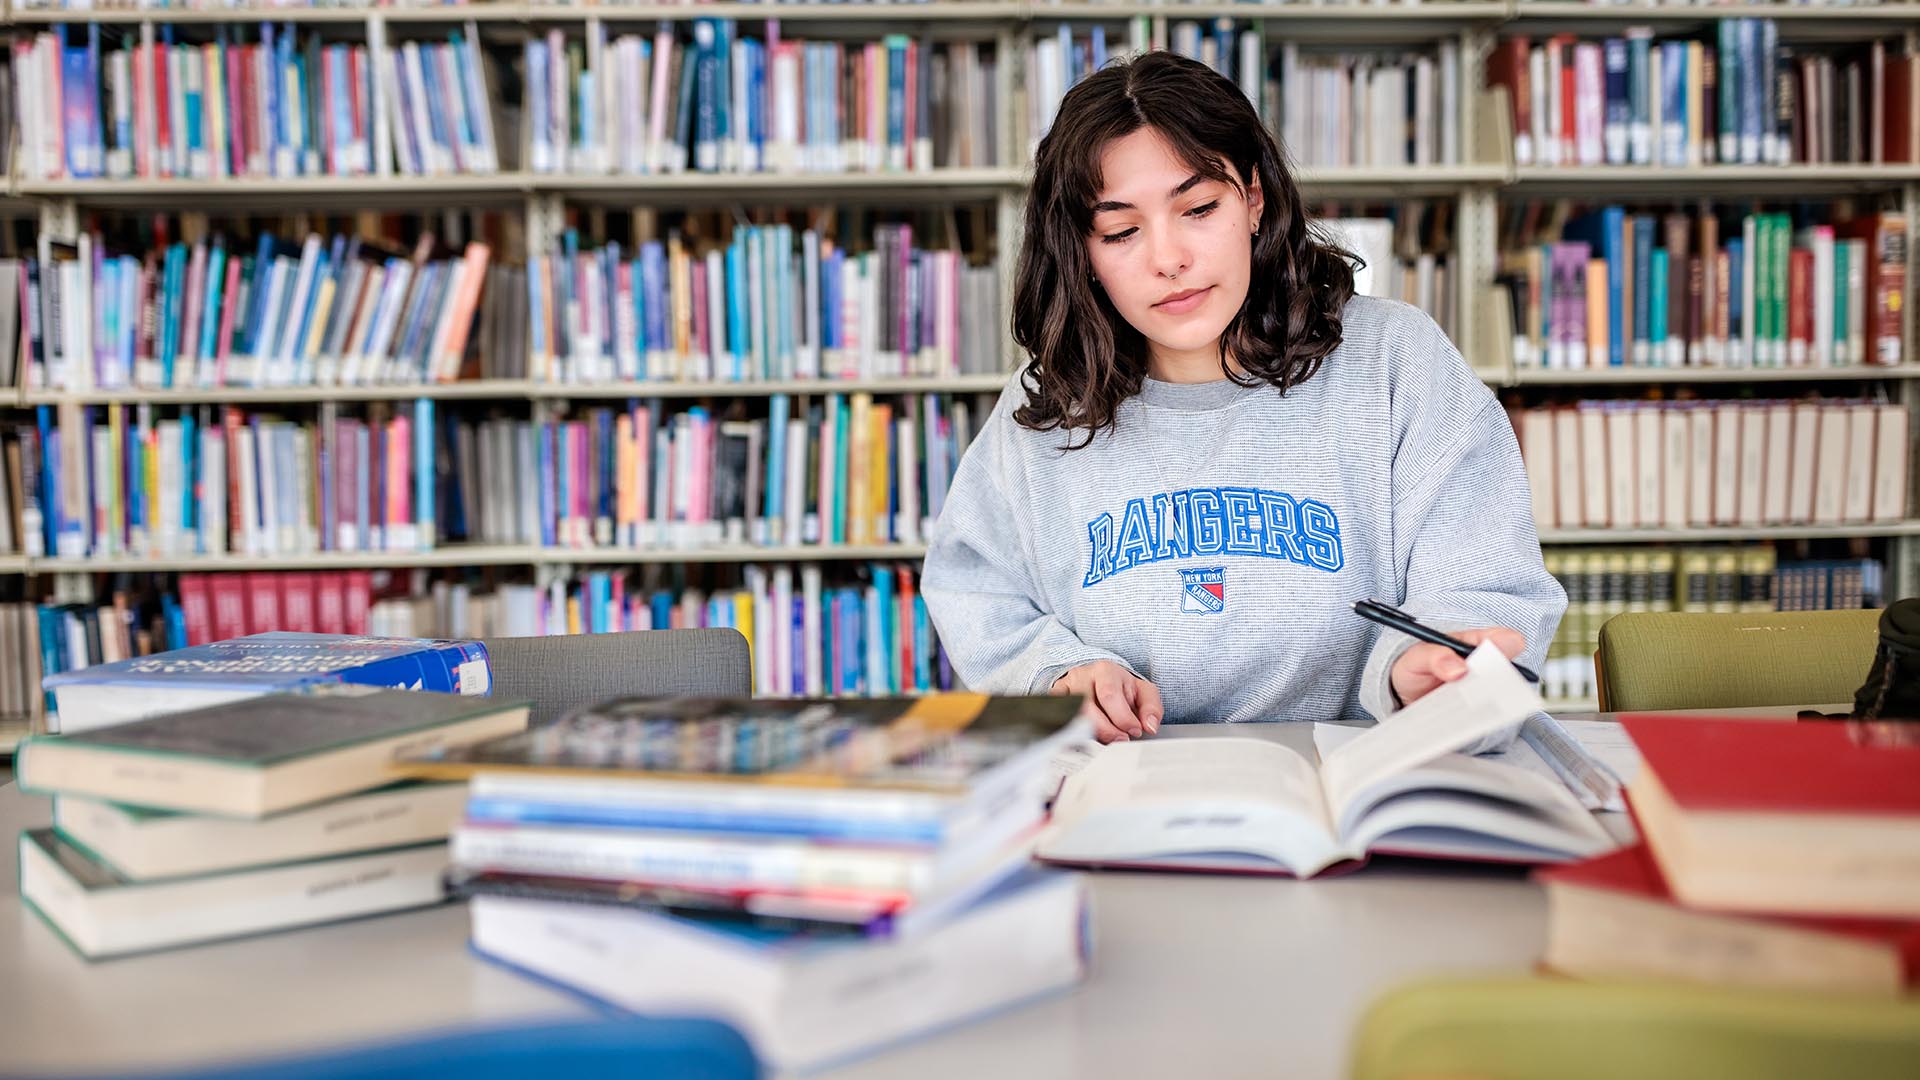 This initiative is saving students millions of dollars in textbook costs